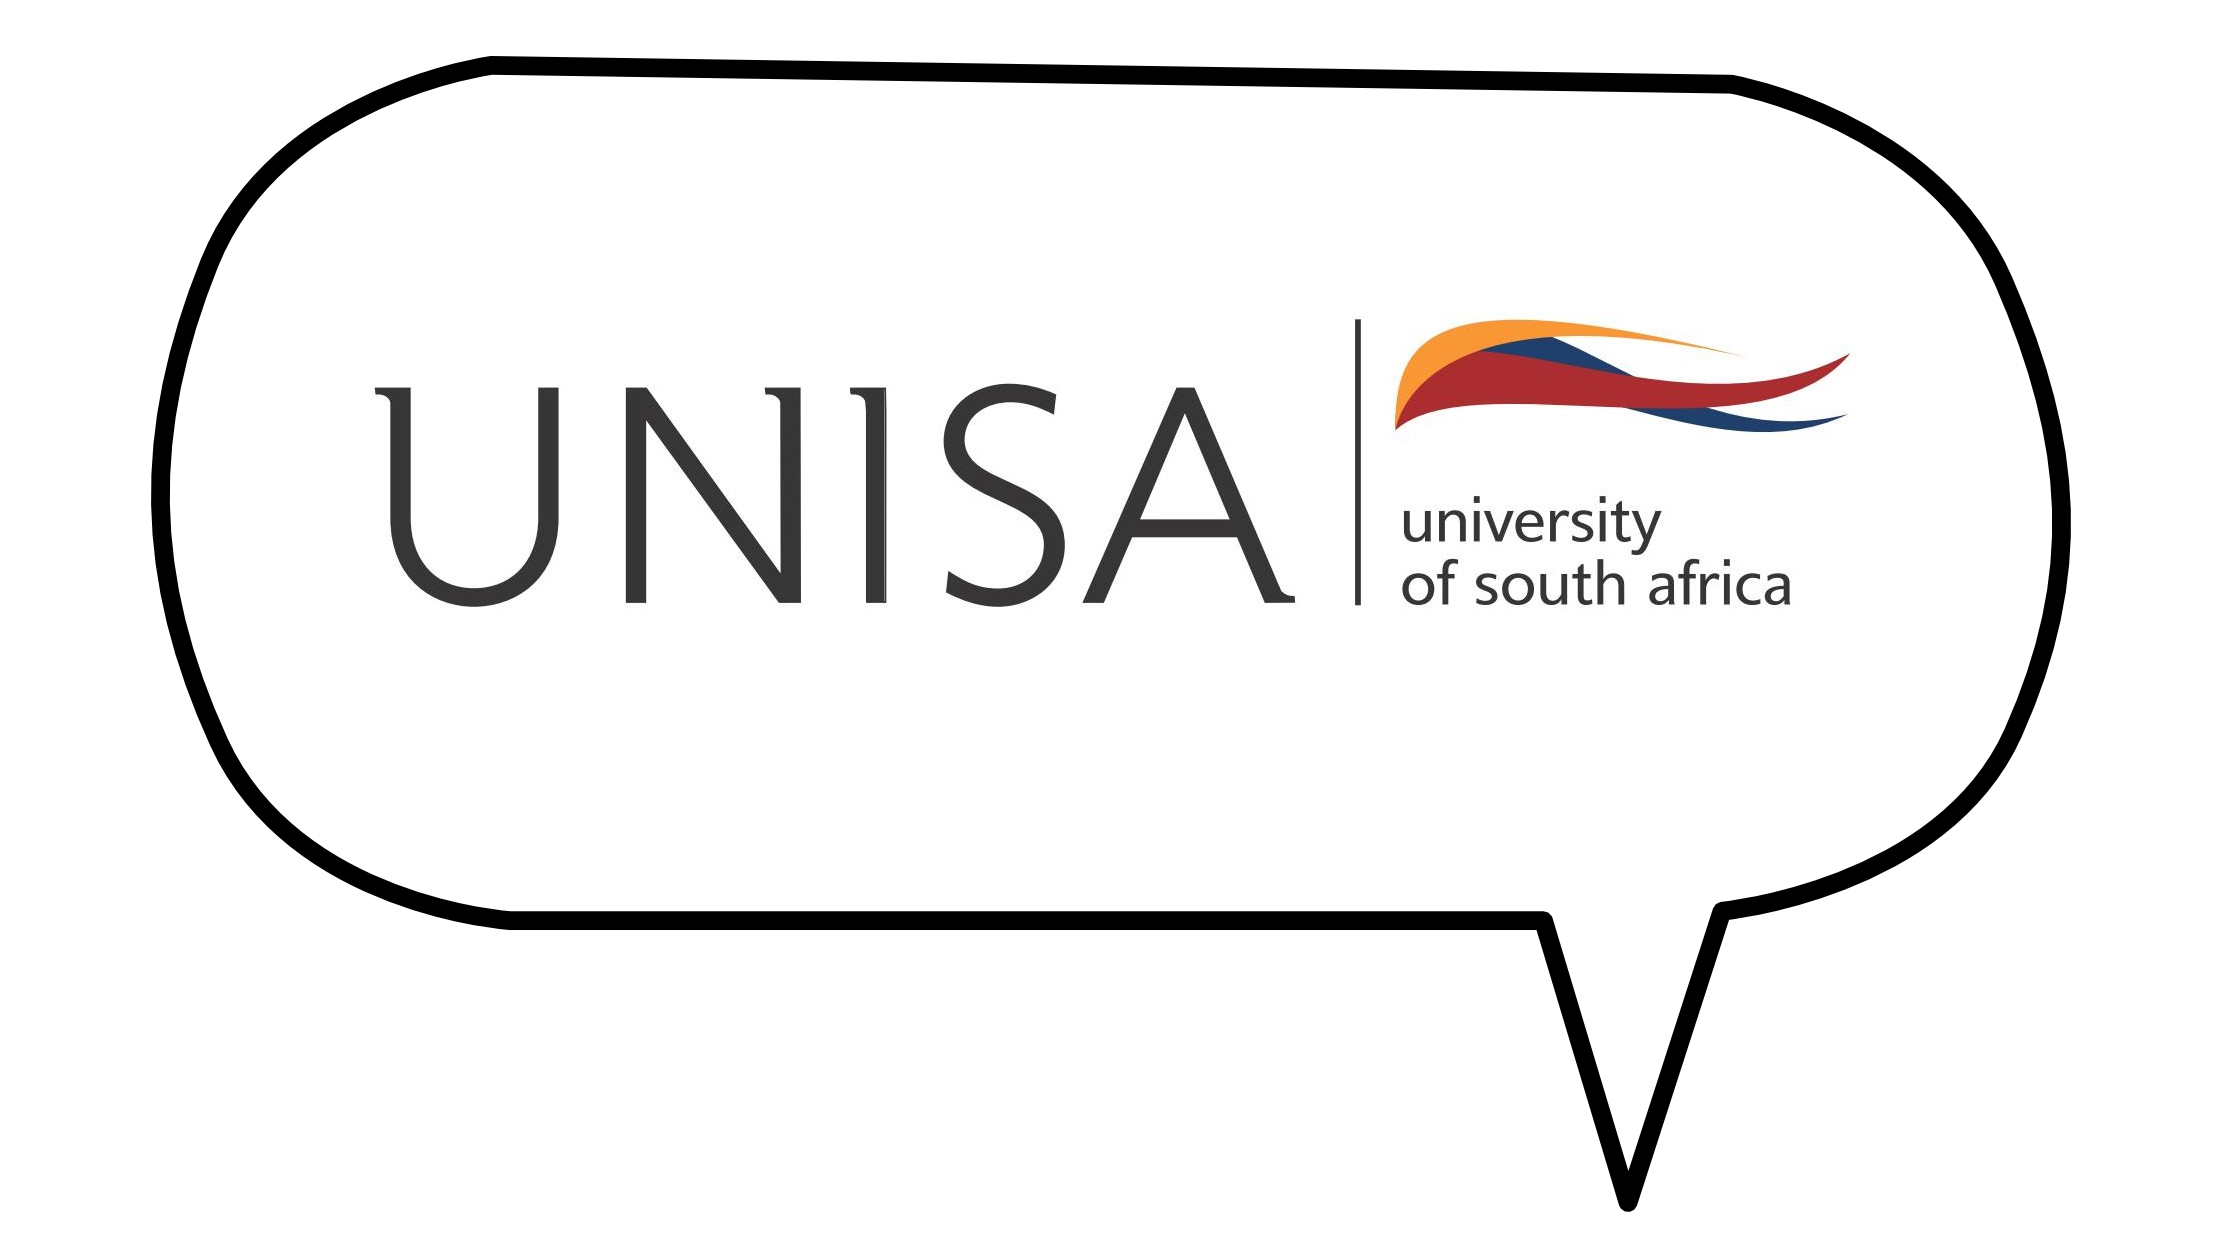 I Did Not Register with Unisa for The Past Few Years. Can I Still Complete My Degree?